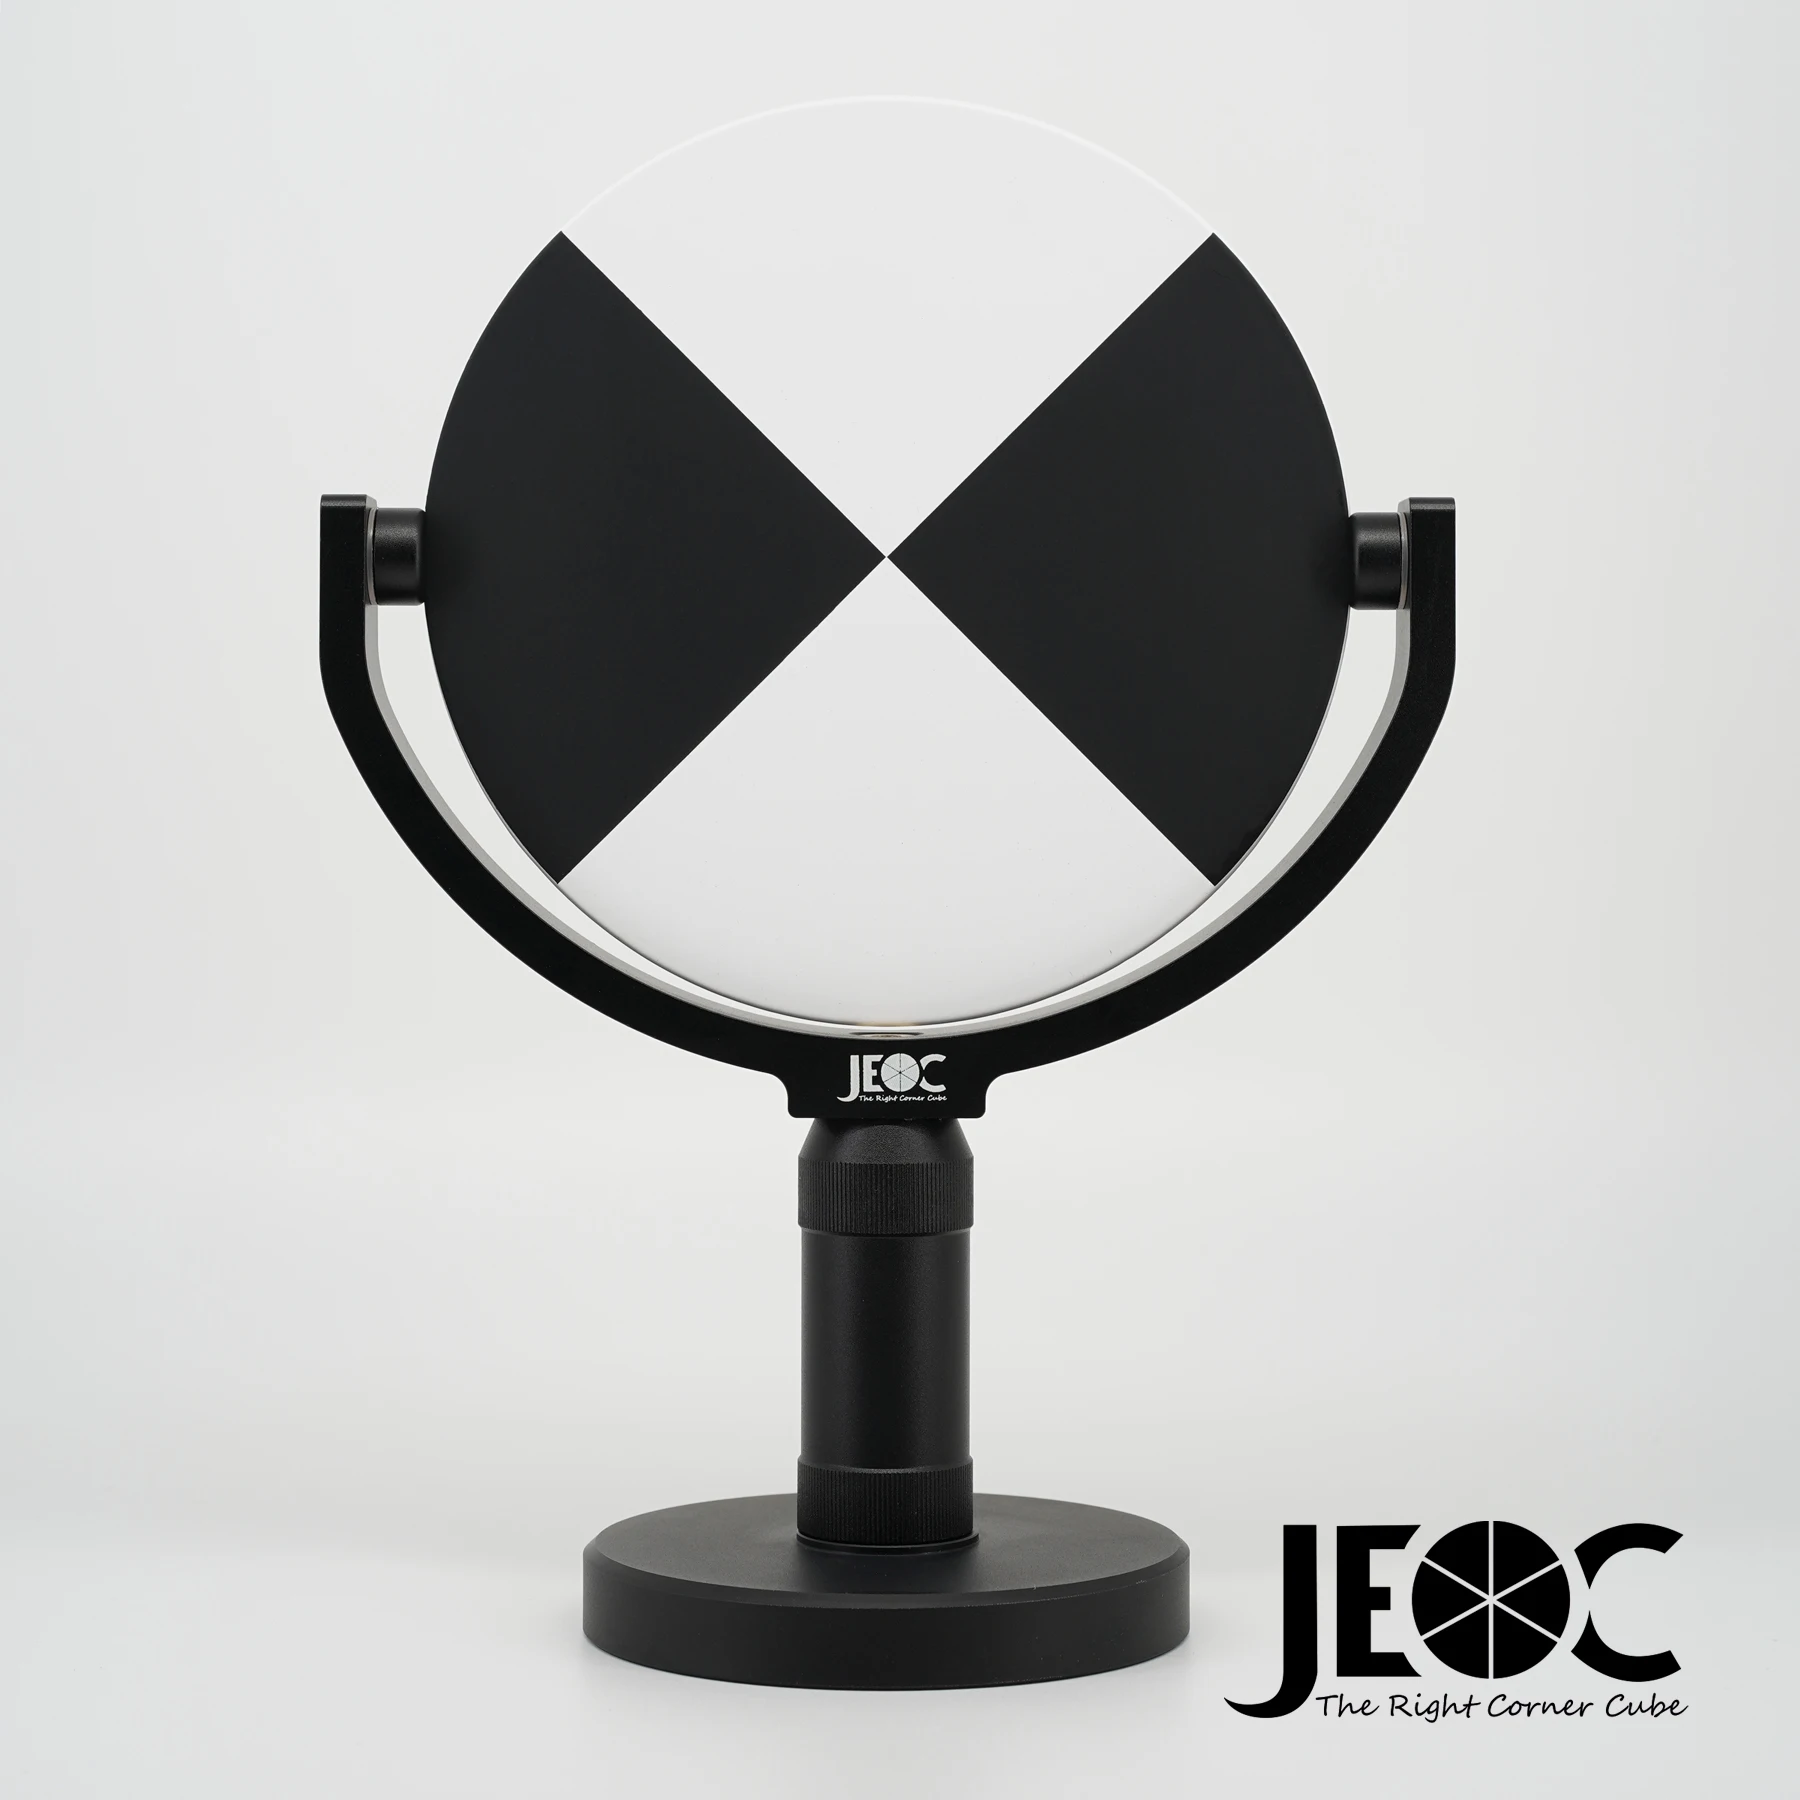 

JEOC 6" Paddle Scanner Target for Faro Laser tracker, 155mm Target with / without Magnetic Mount Accessories Topography